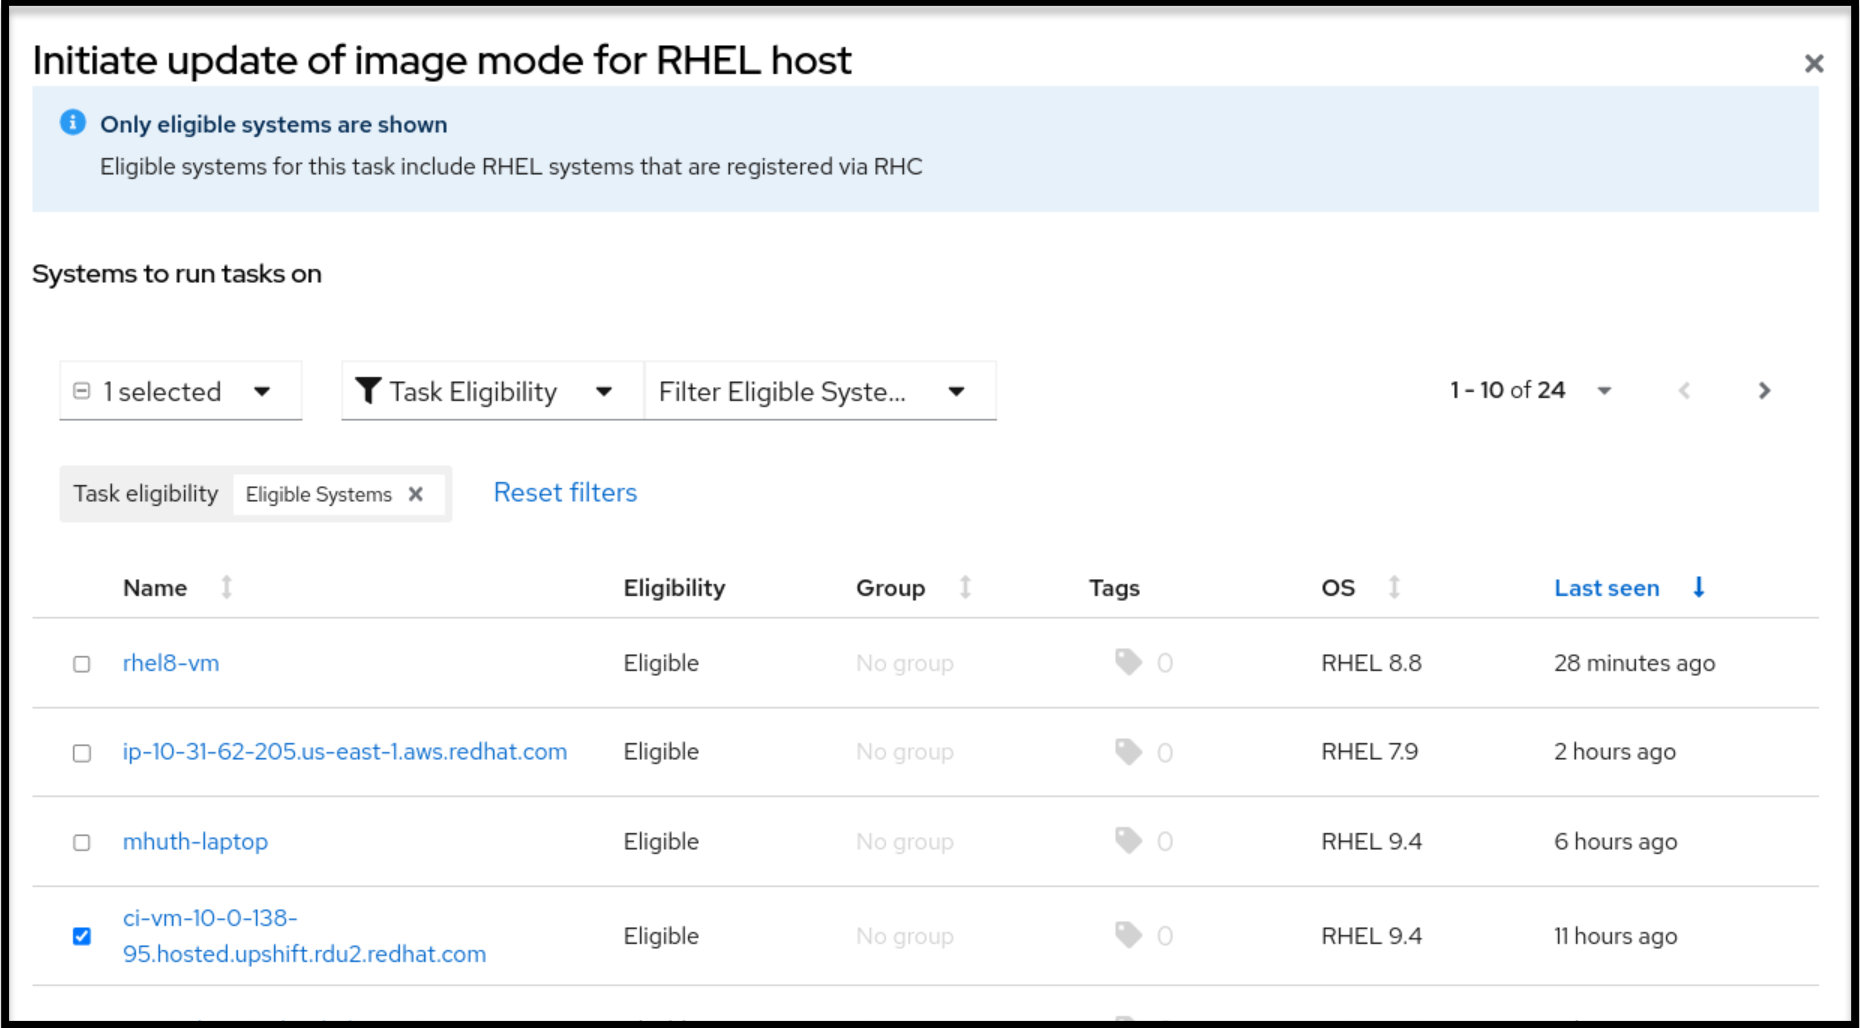 Eligible RHEL 9.4 system selected